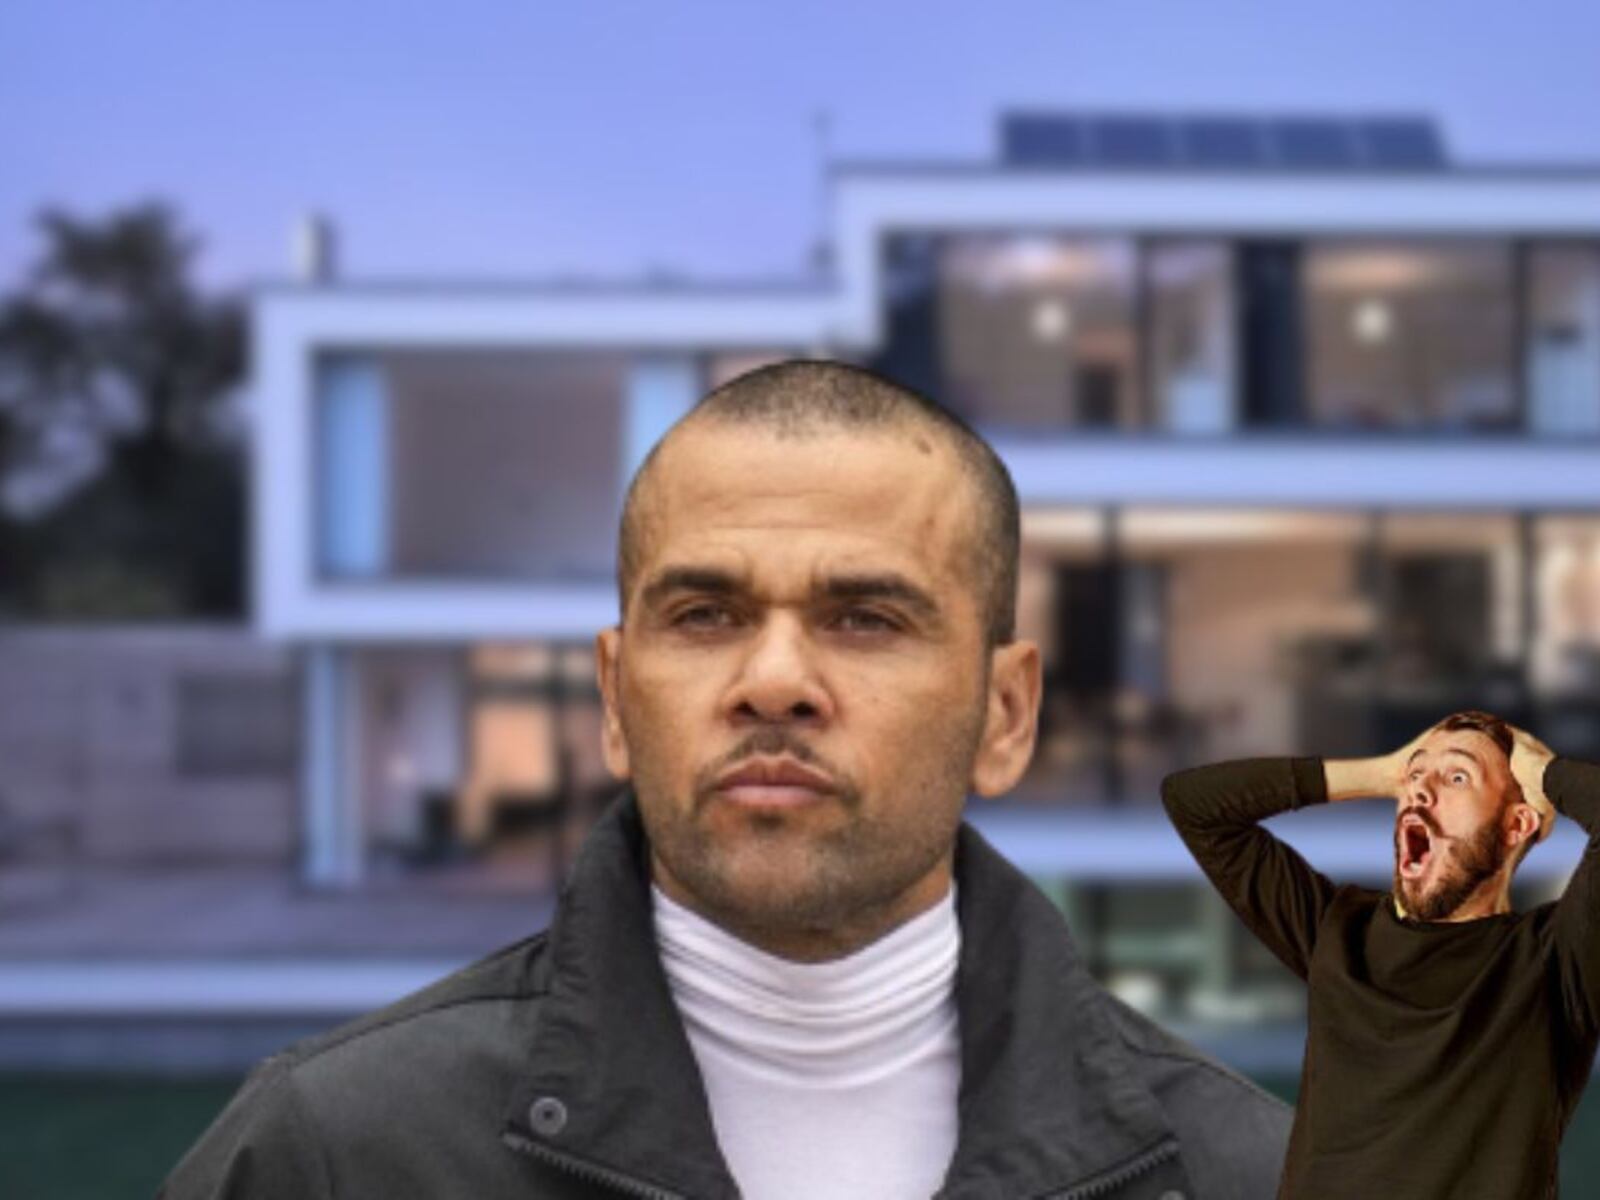 He just got out of jail and the first thing Dani Alves did, no one can believe it